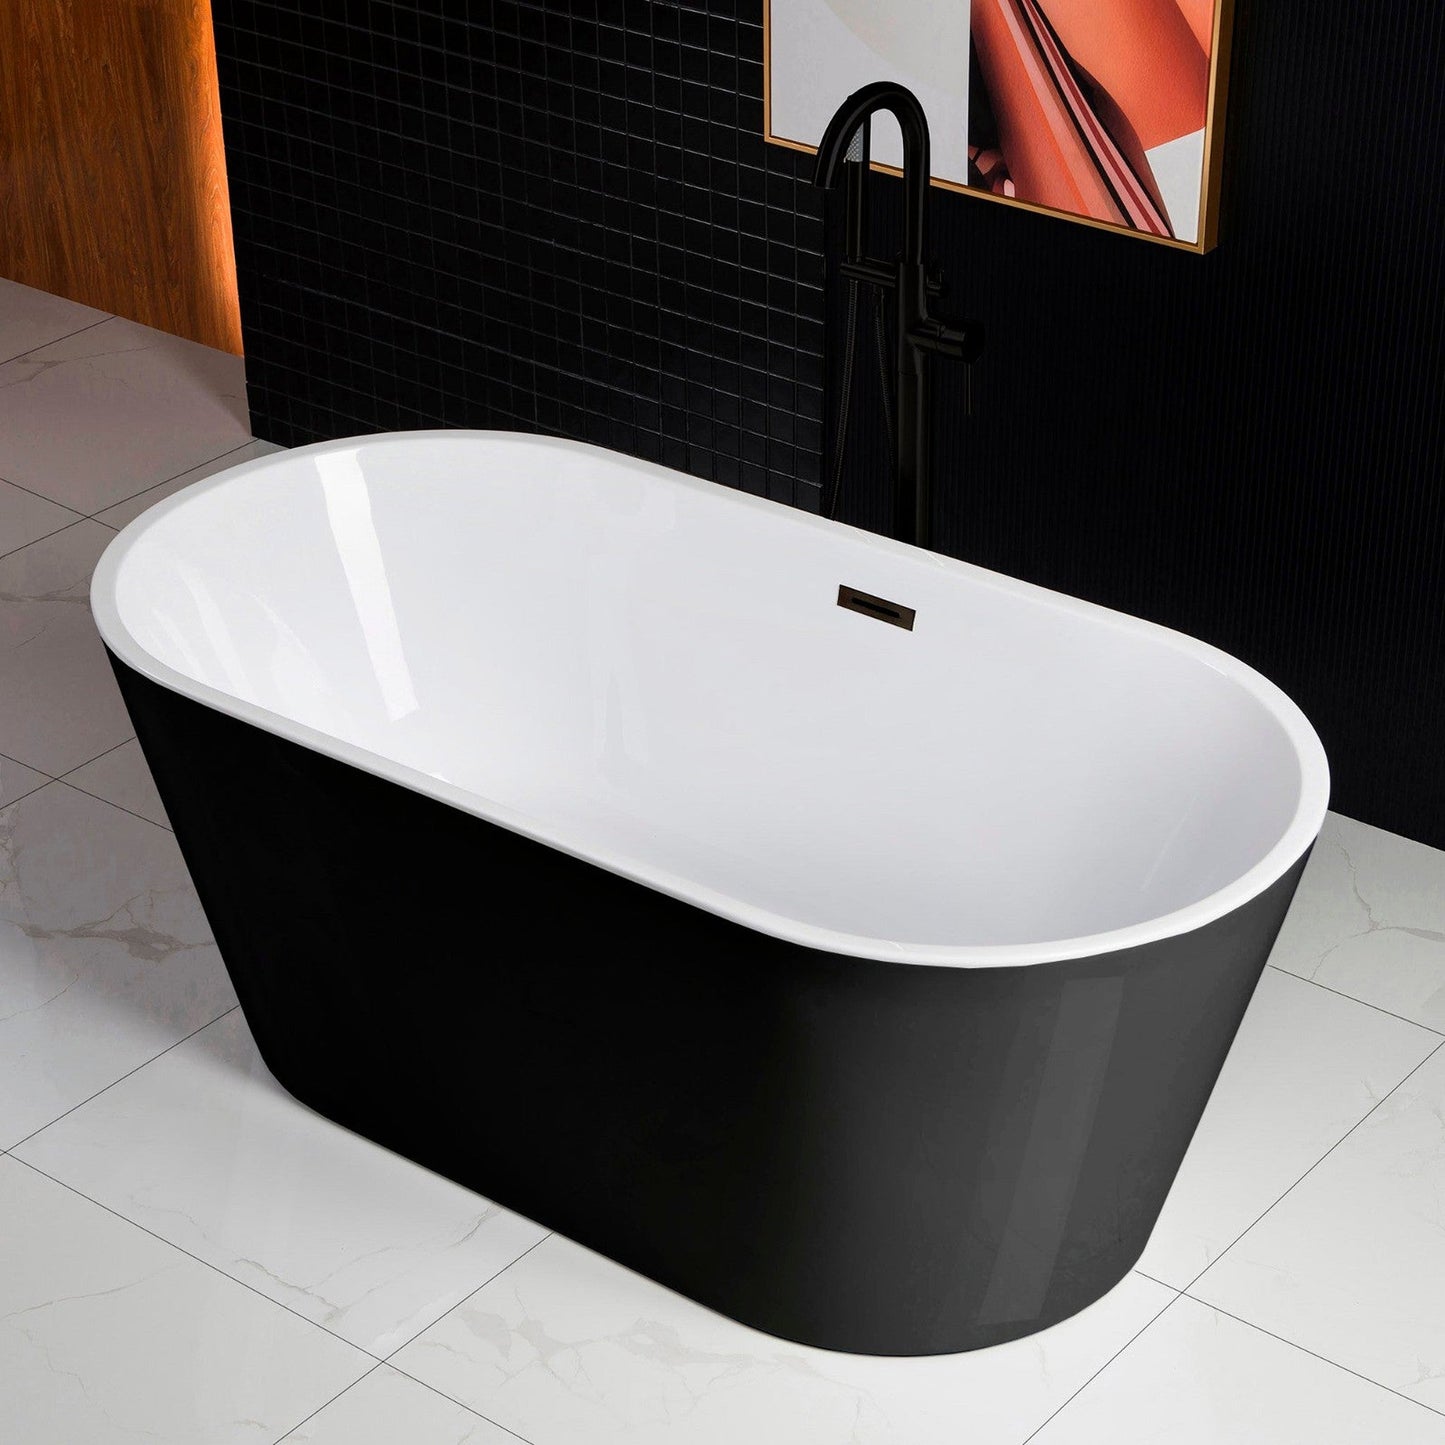 WoodBridge 59" Black Acrylic Freestanding Contemporary Soaking Bathtub With Matte Black Drain, Overflow,F0025MBRD Tub Filler and Caddy Tray